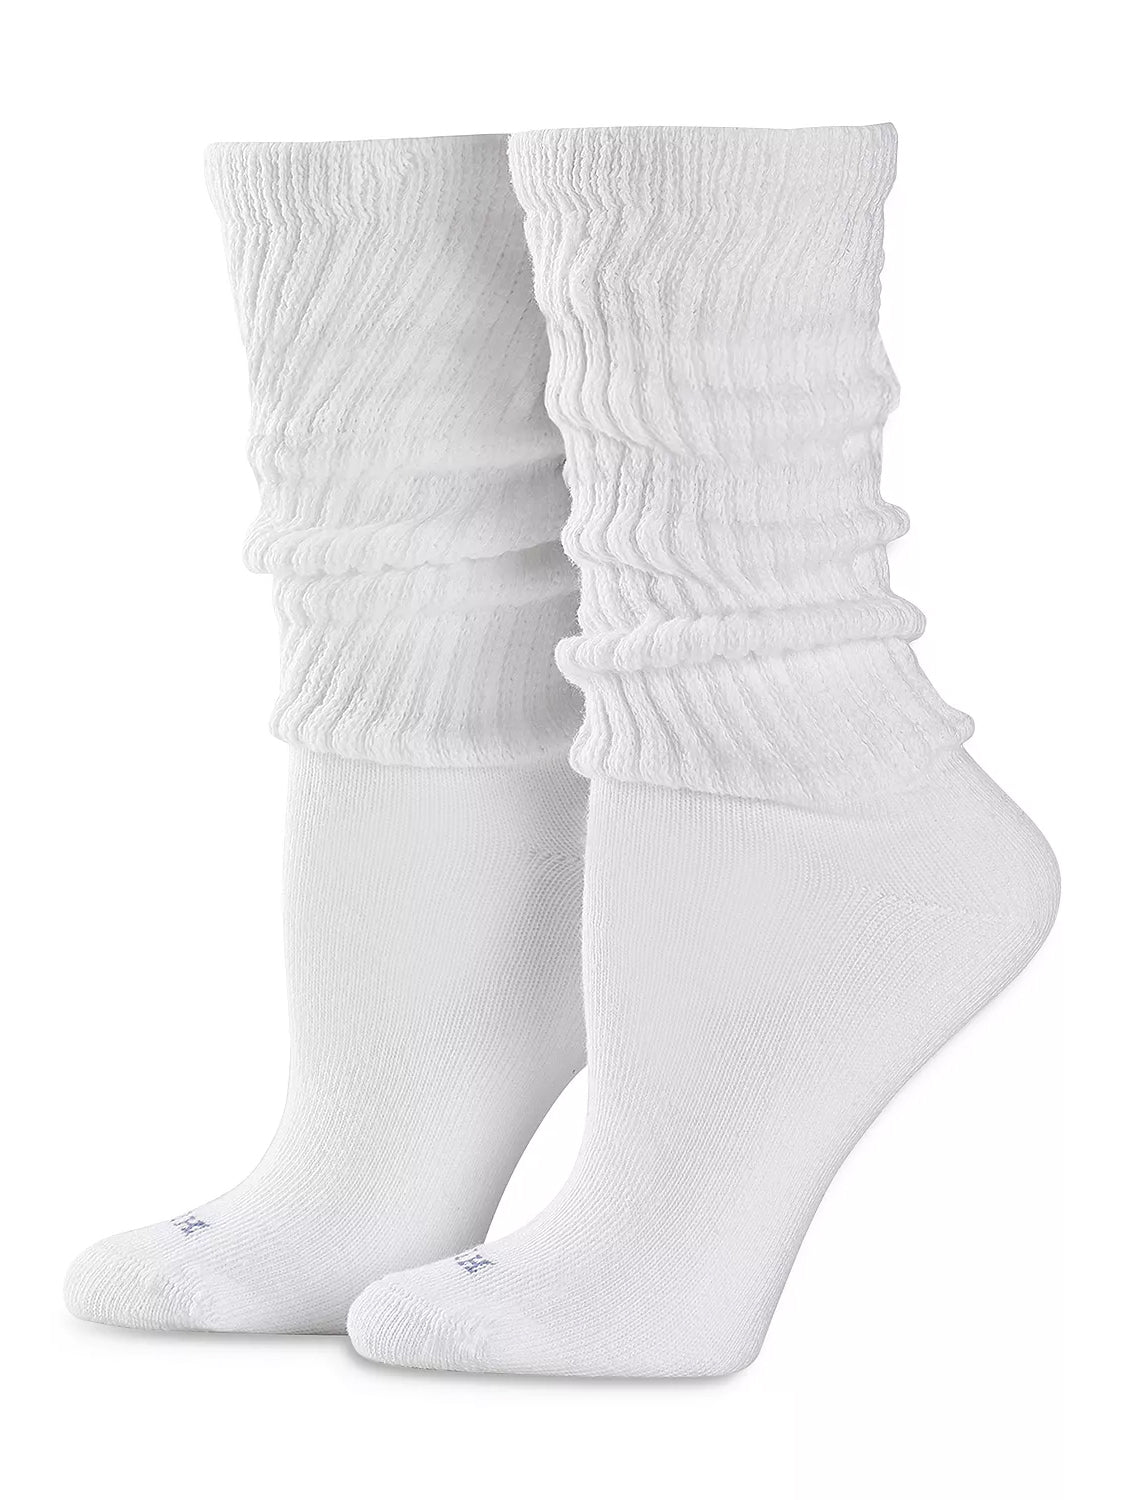 The Slouch Sock